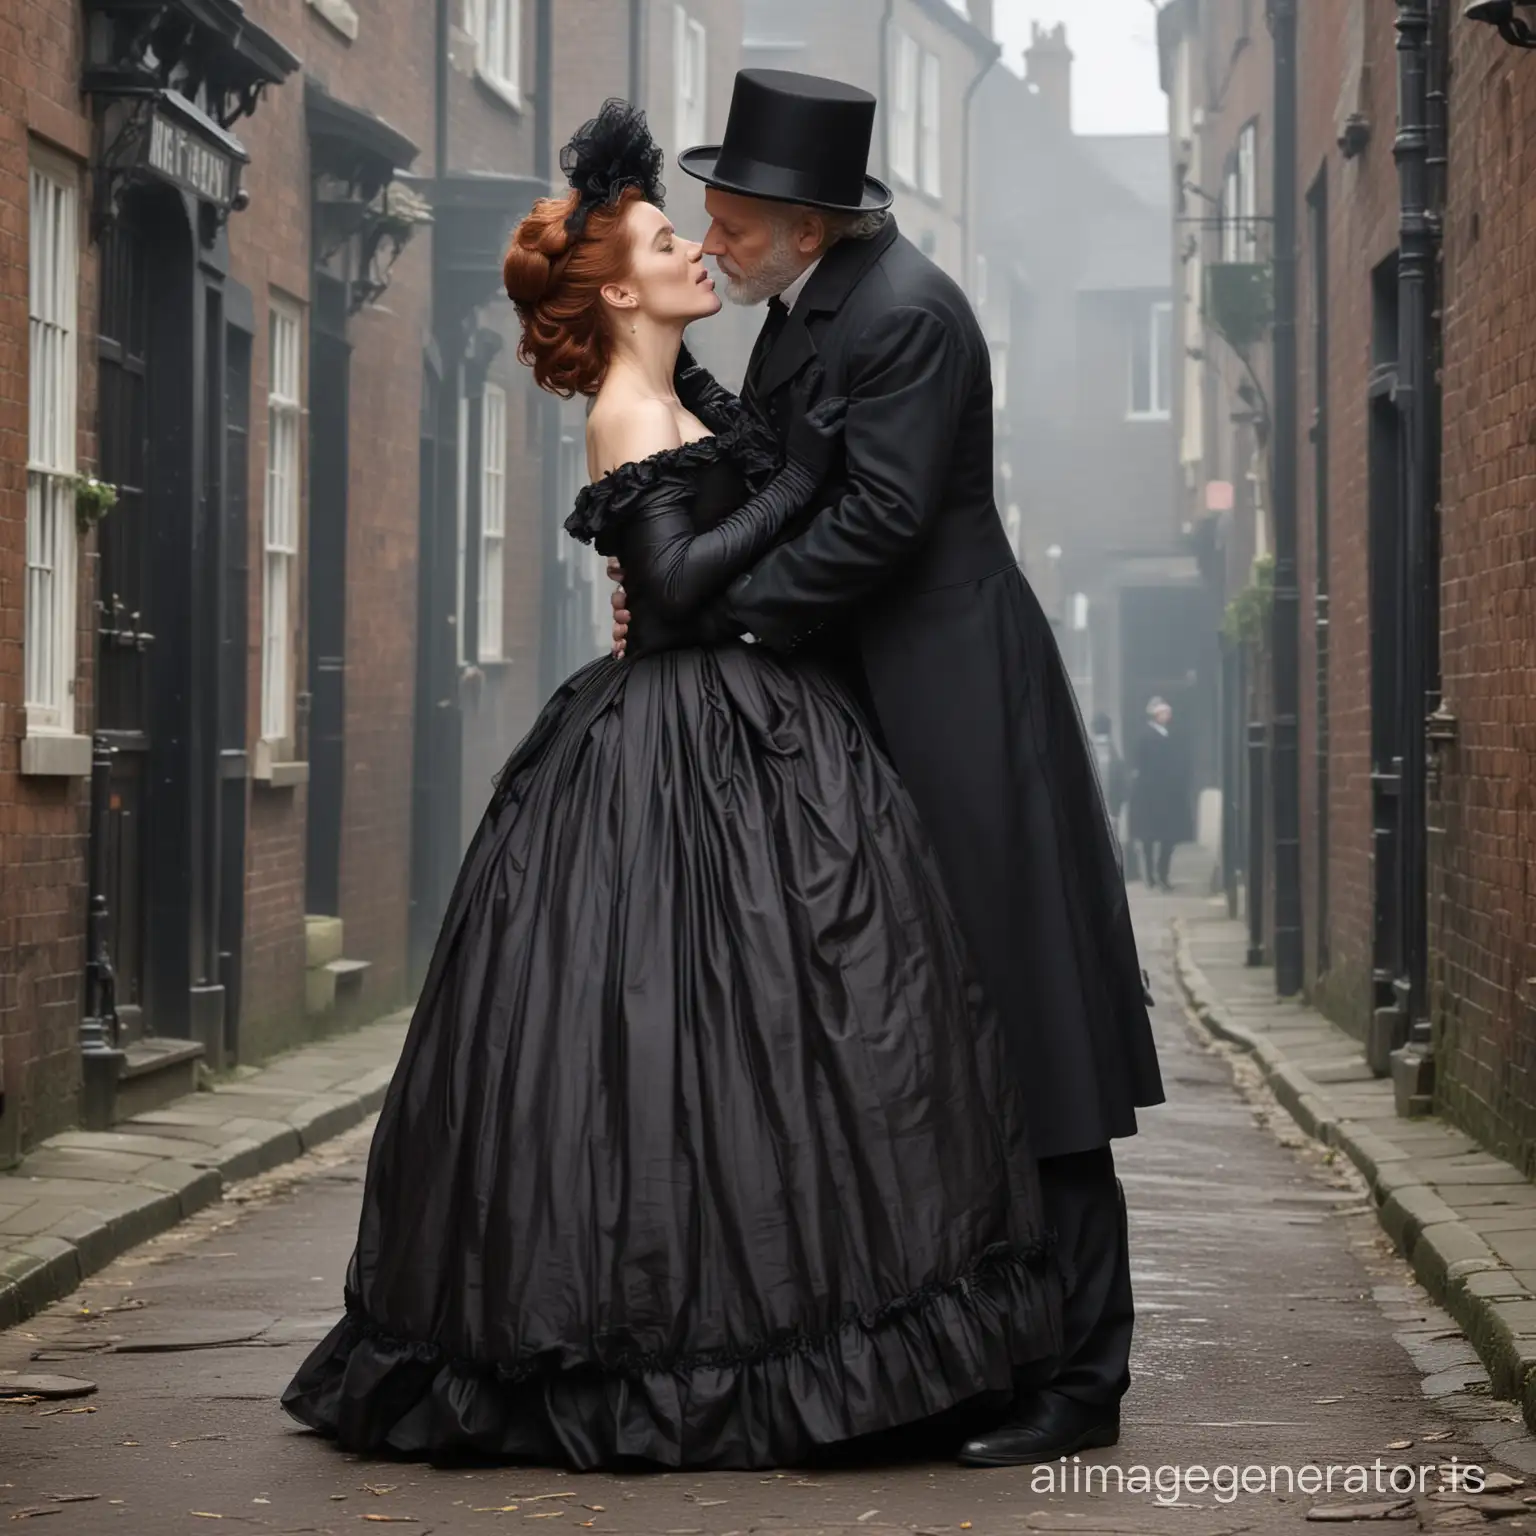 red hair Gillian Anderson wearing a dark chocolate floor-length loose billowing 1860 Victorian crinoline poofy dress with a frilly bonnet on Victorian era street kissing lovingly an old man dressed into a black Victorian suit who seems to be her dear husband